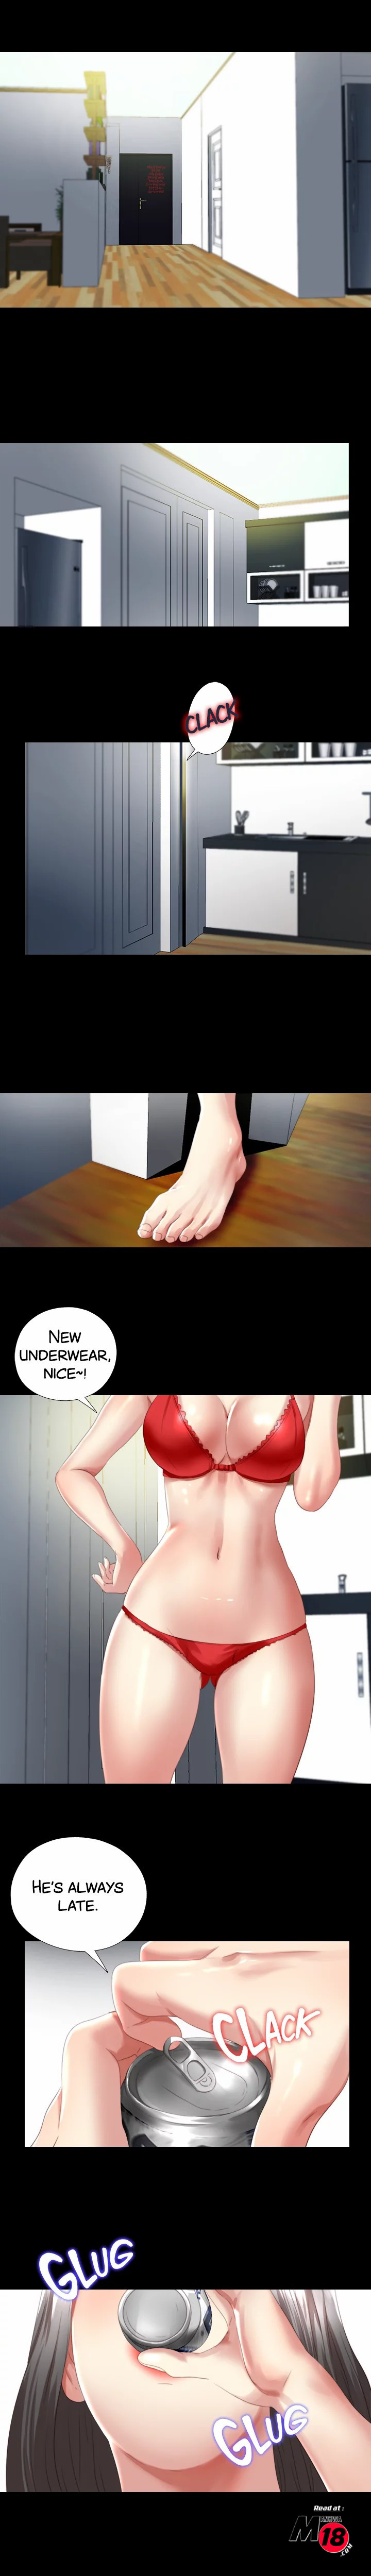 Under One Roof - Chapter 1 Page 16